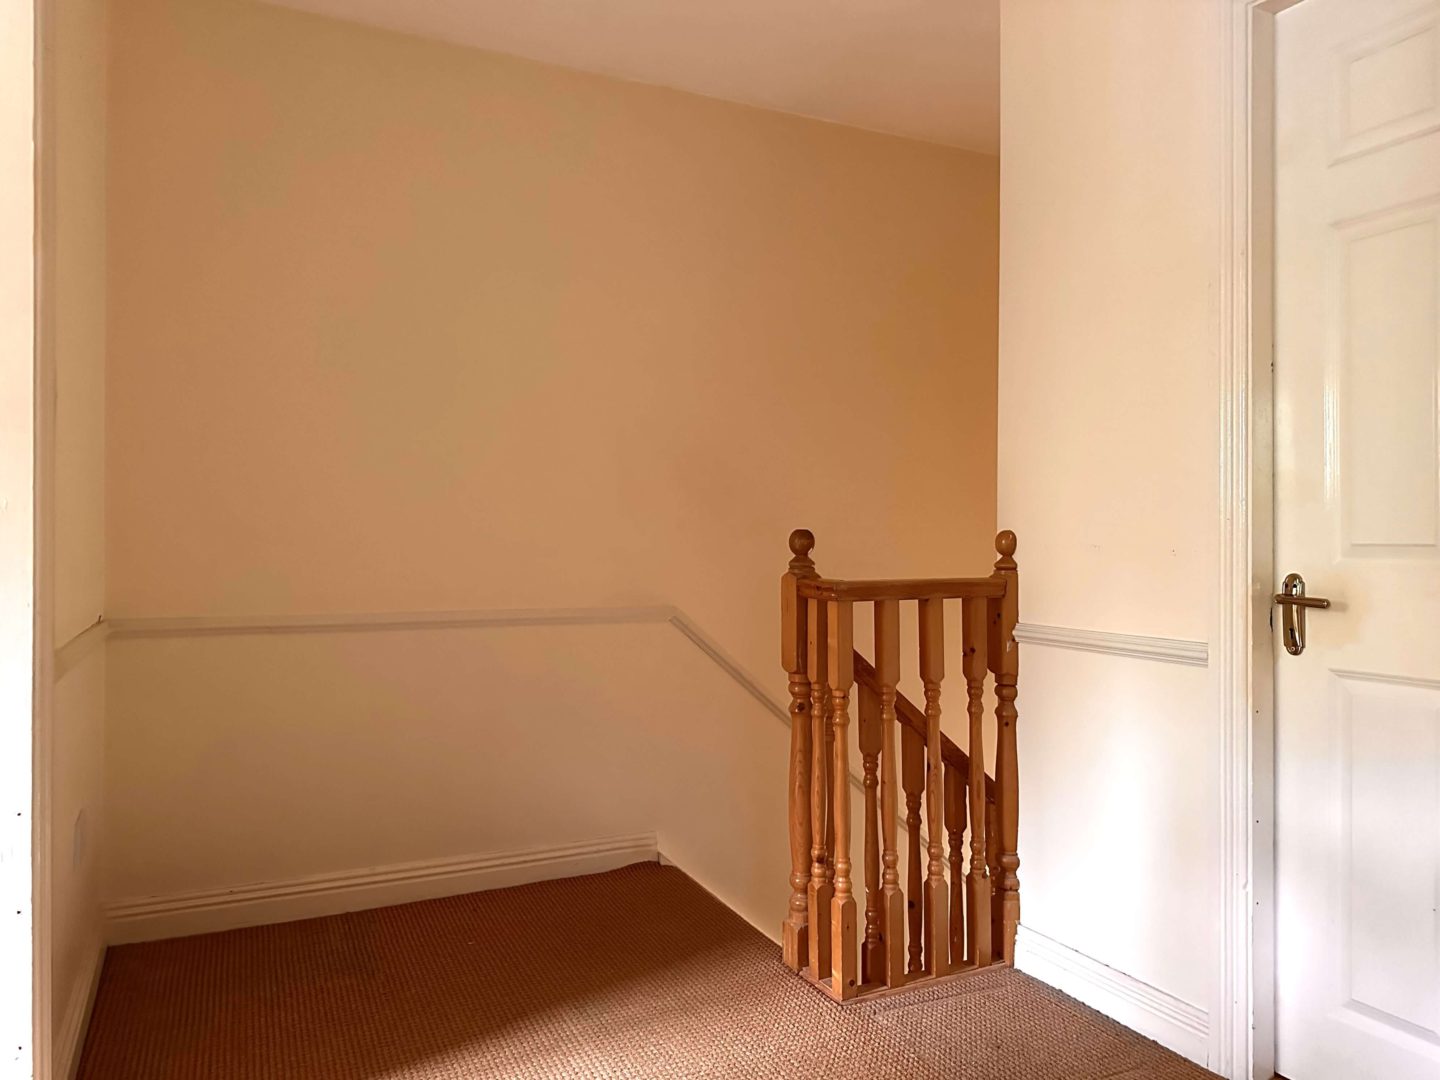 An old hallway with cream walls and a dado rail.